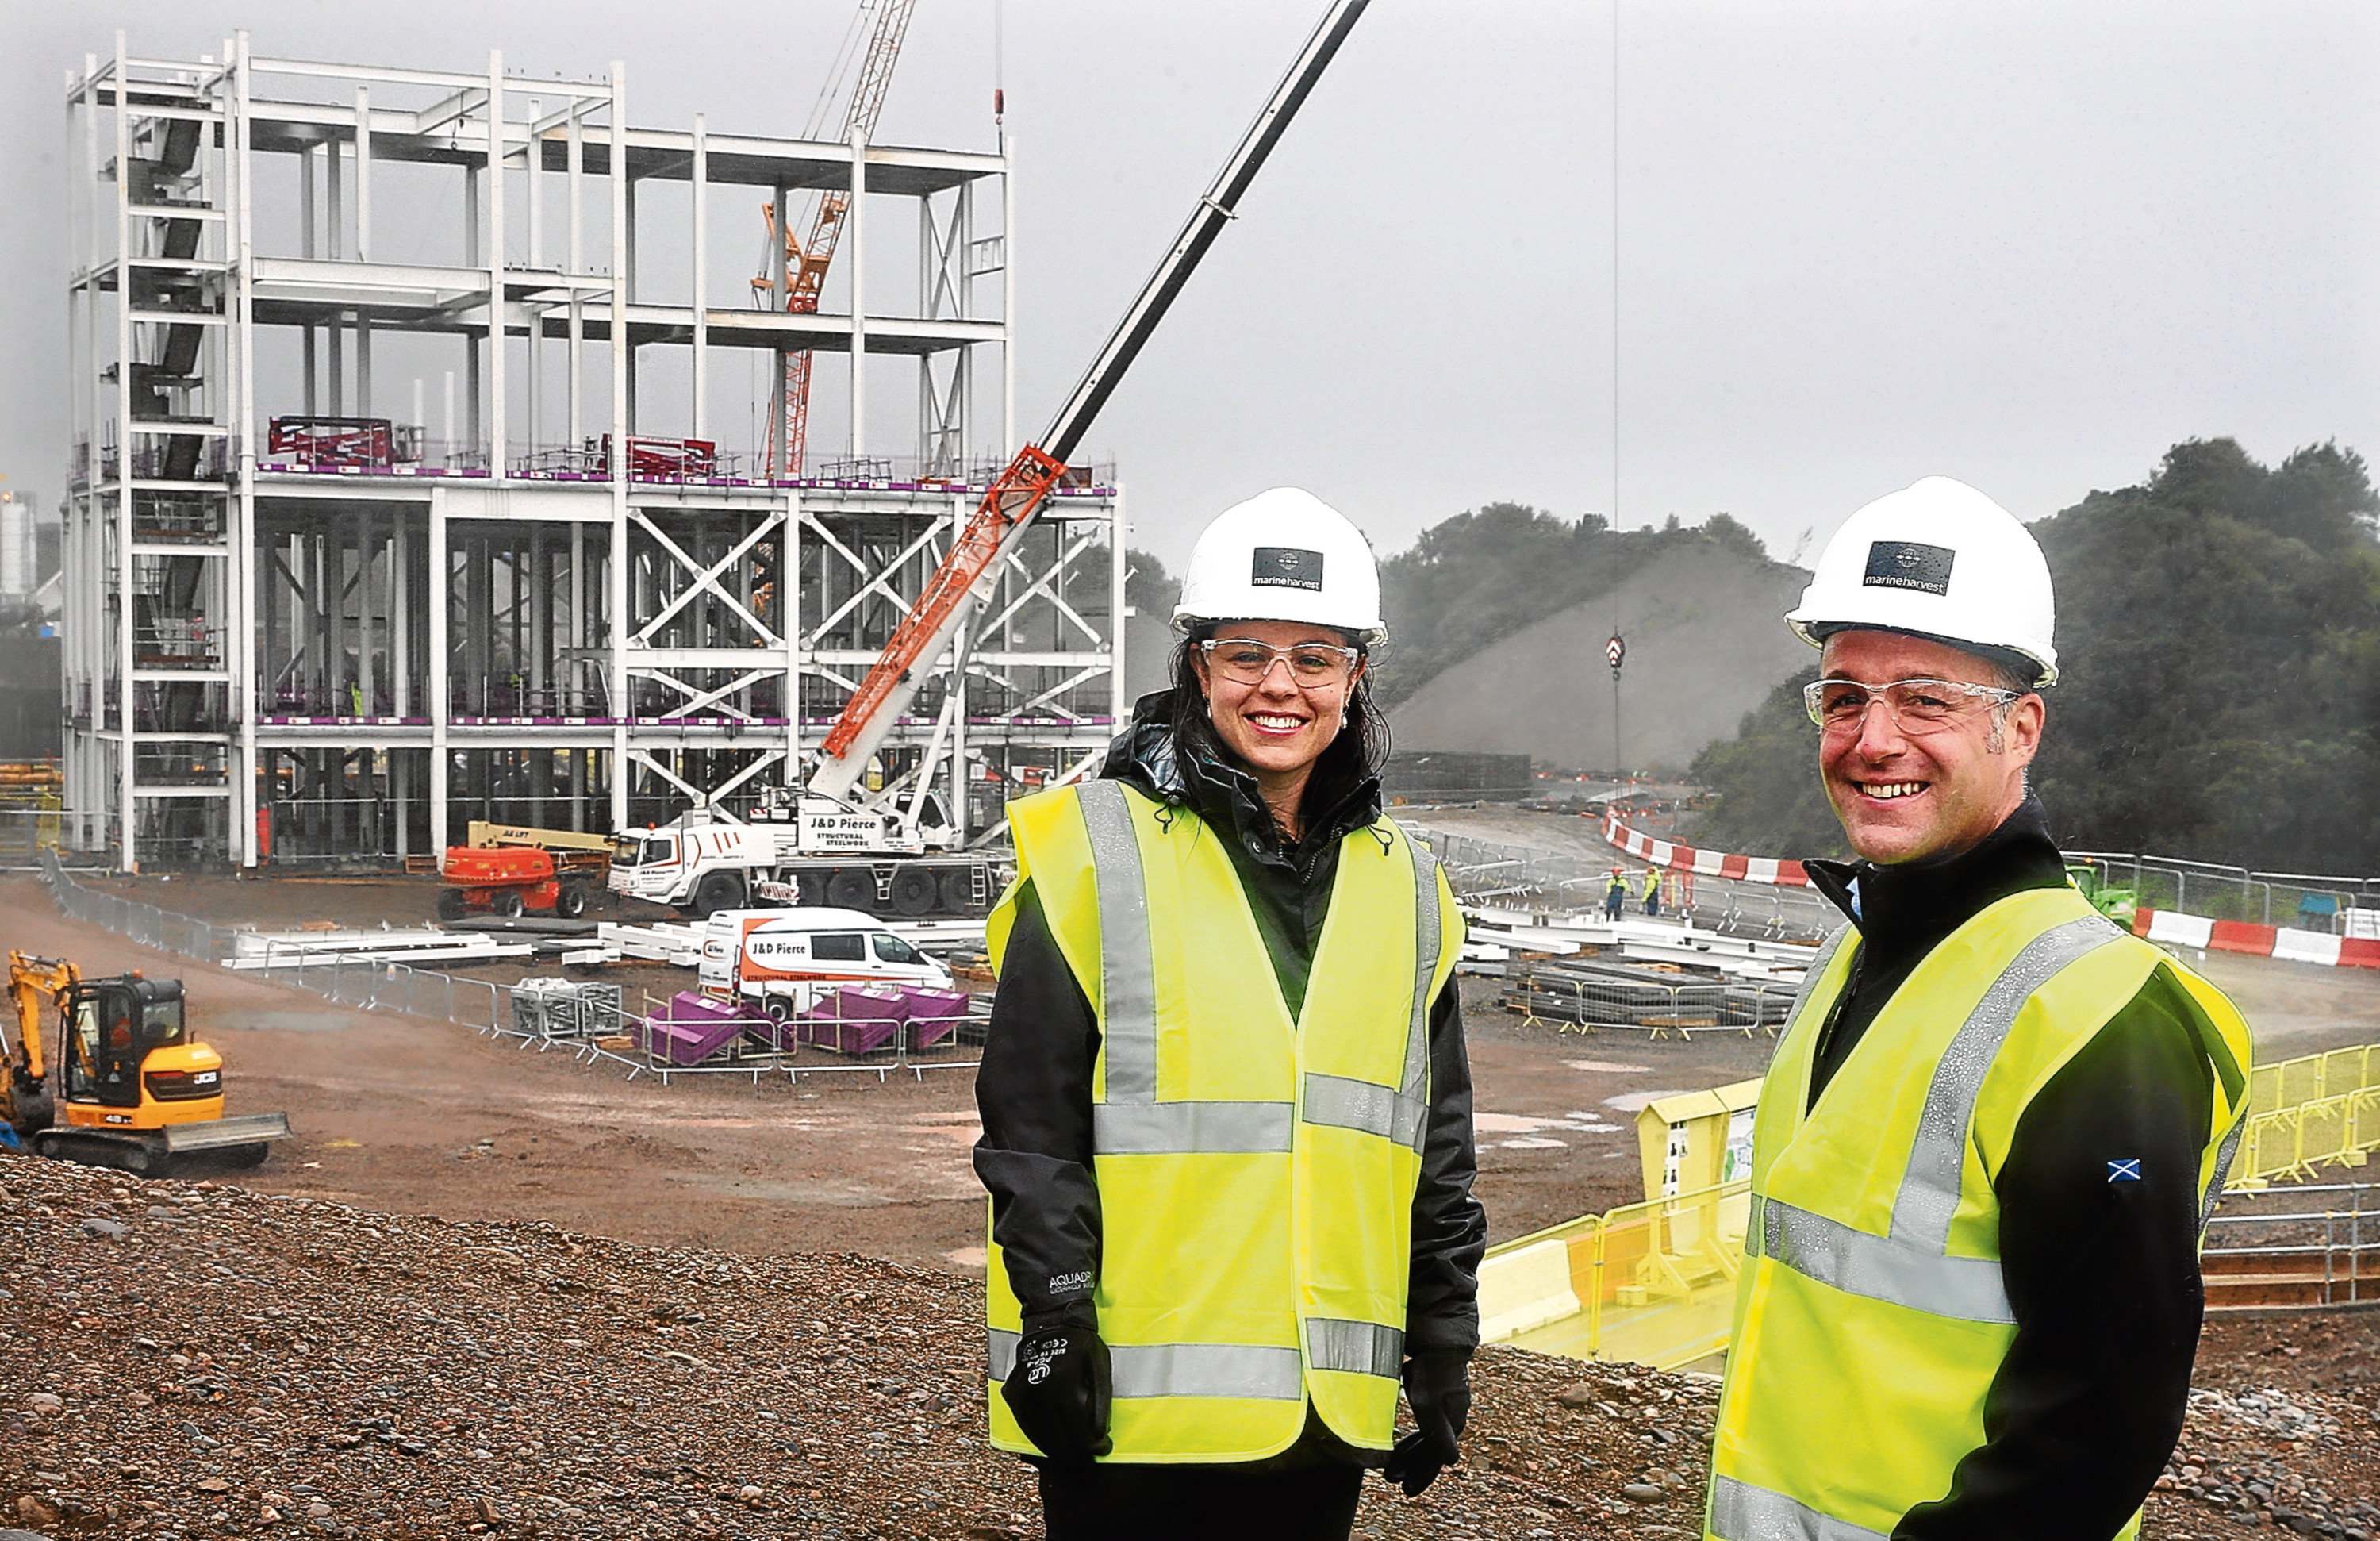 Kate Forbes MSP with Chris Read, Environmental Manager at Marine Harvest